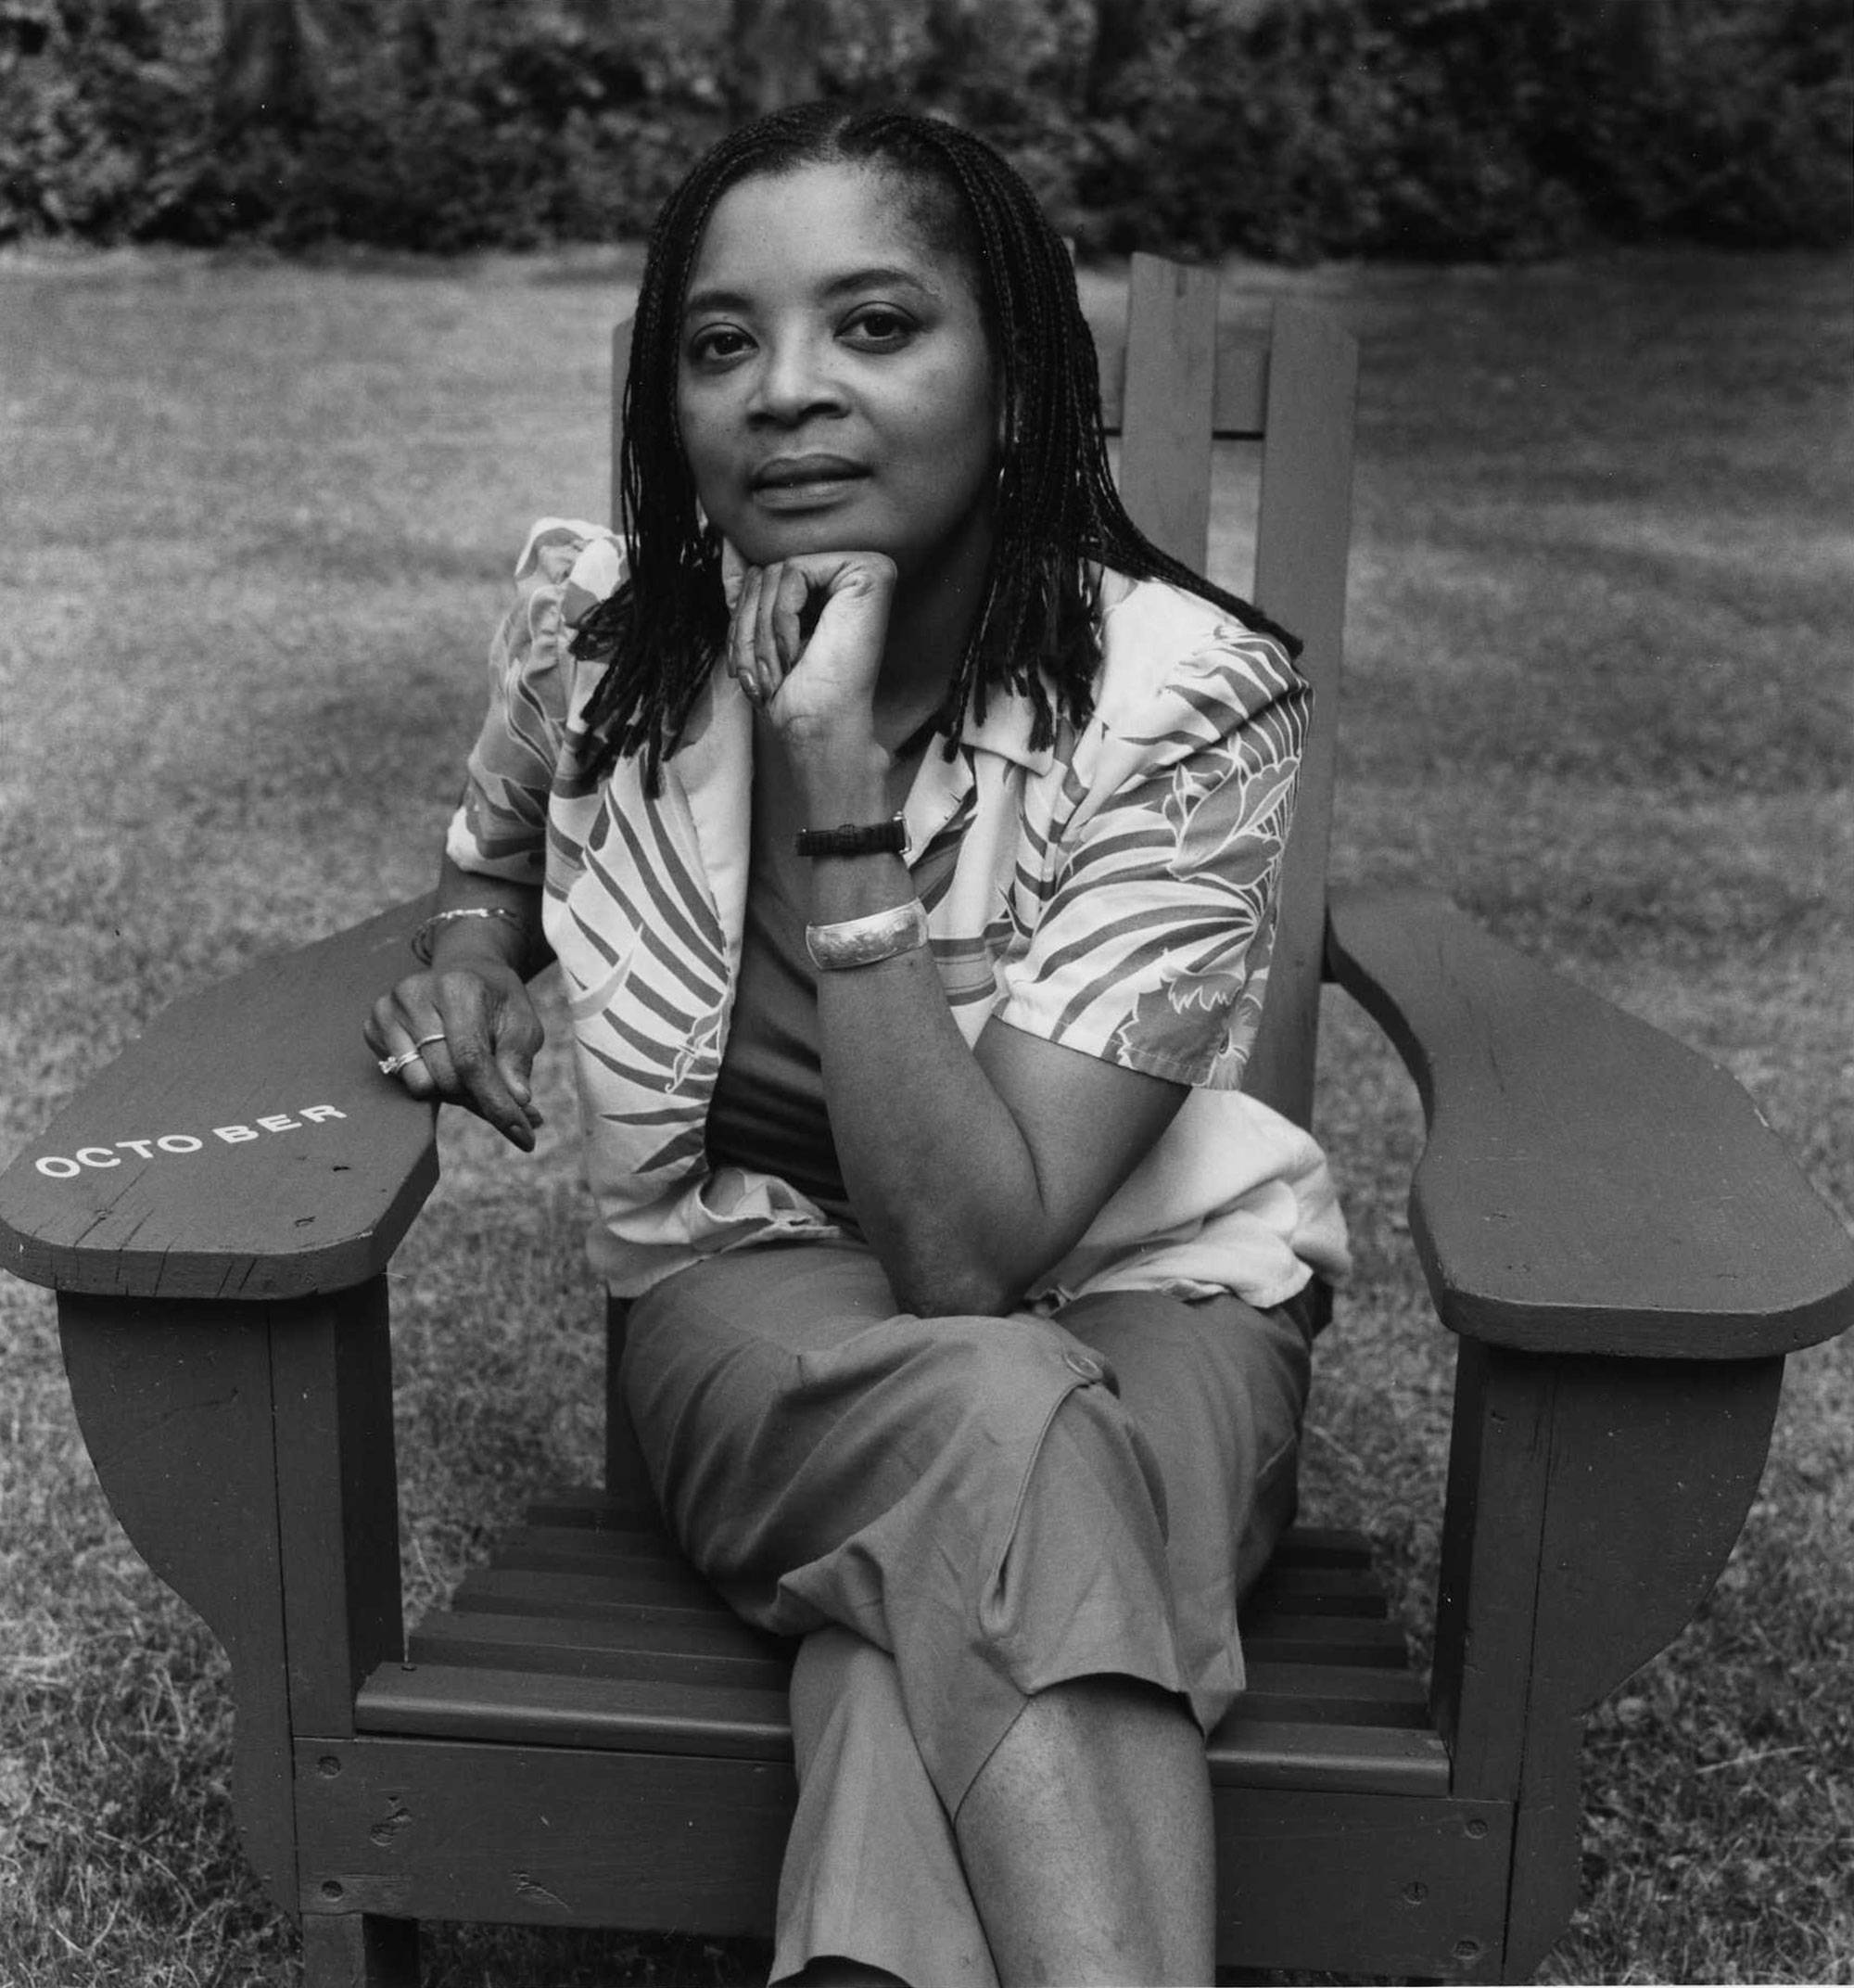 A Black woman sits in an Adirondack chair with her chin resting on a fist.